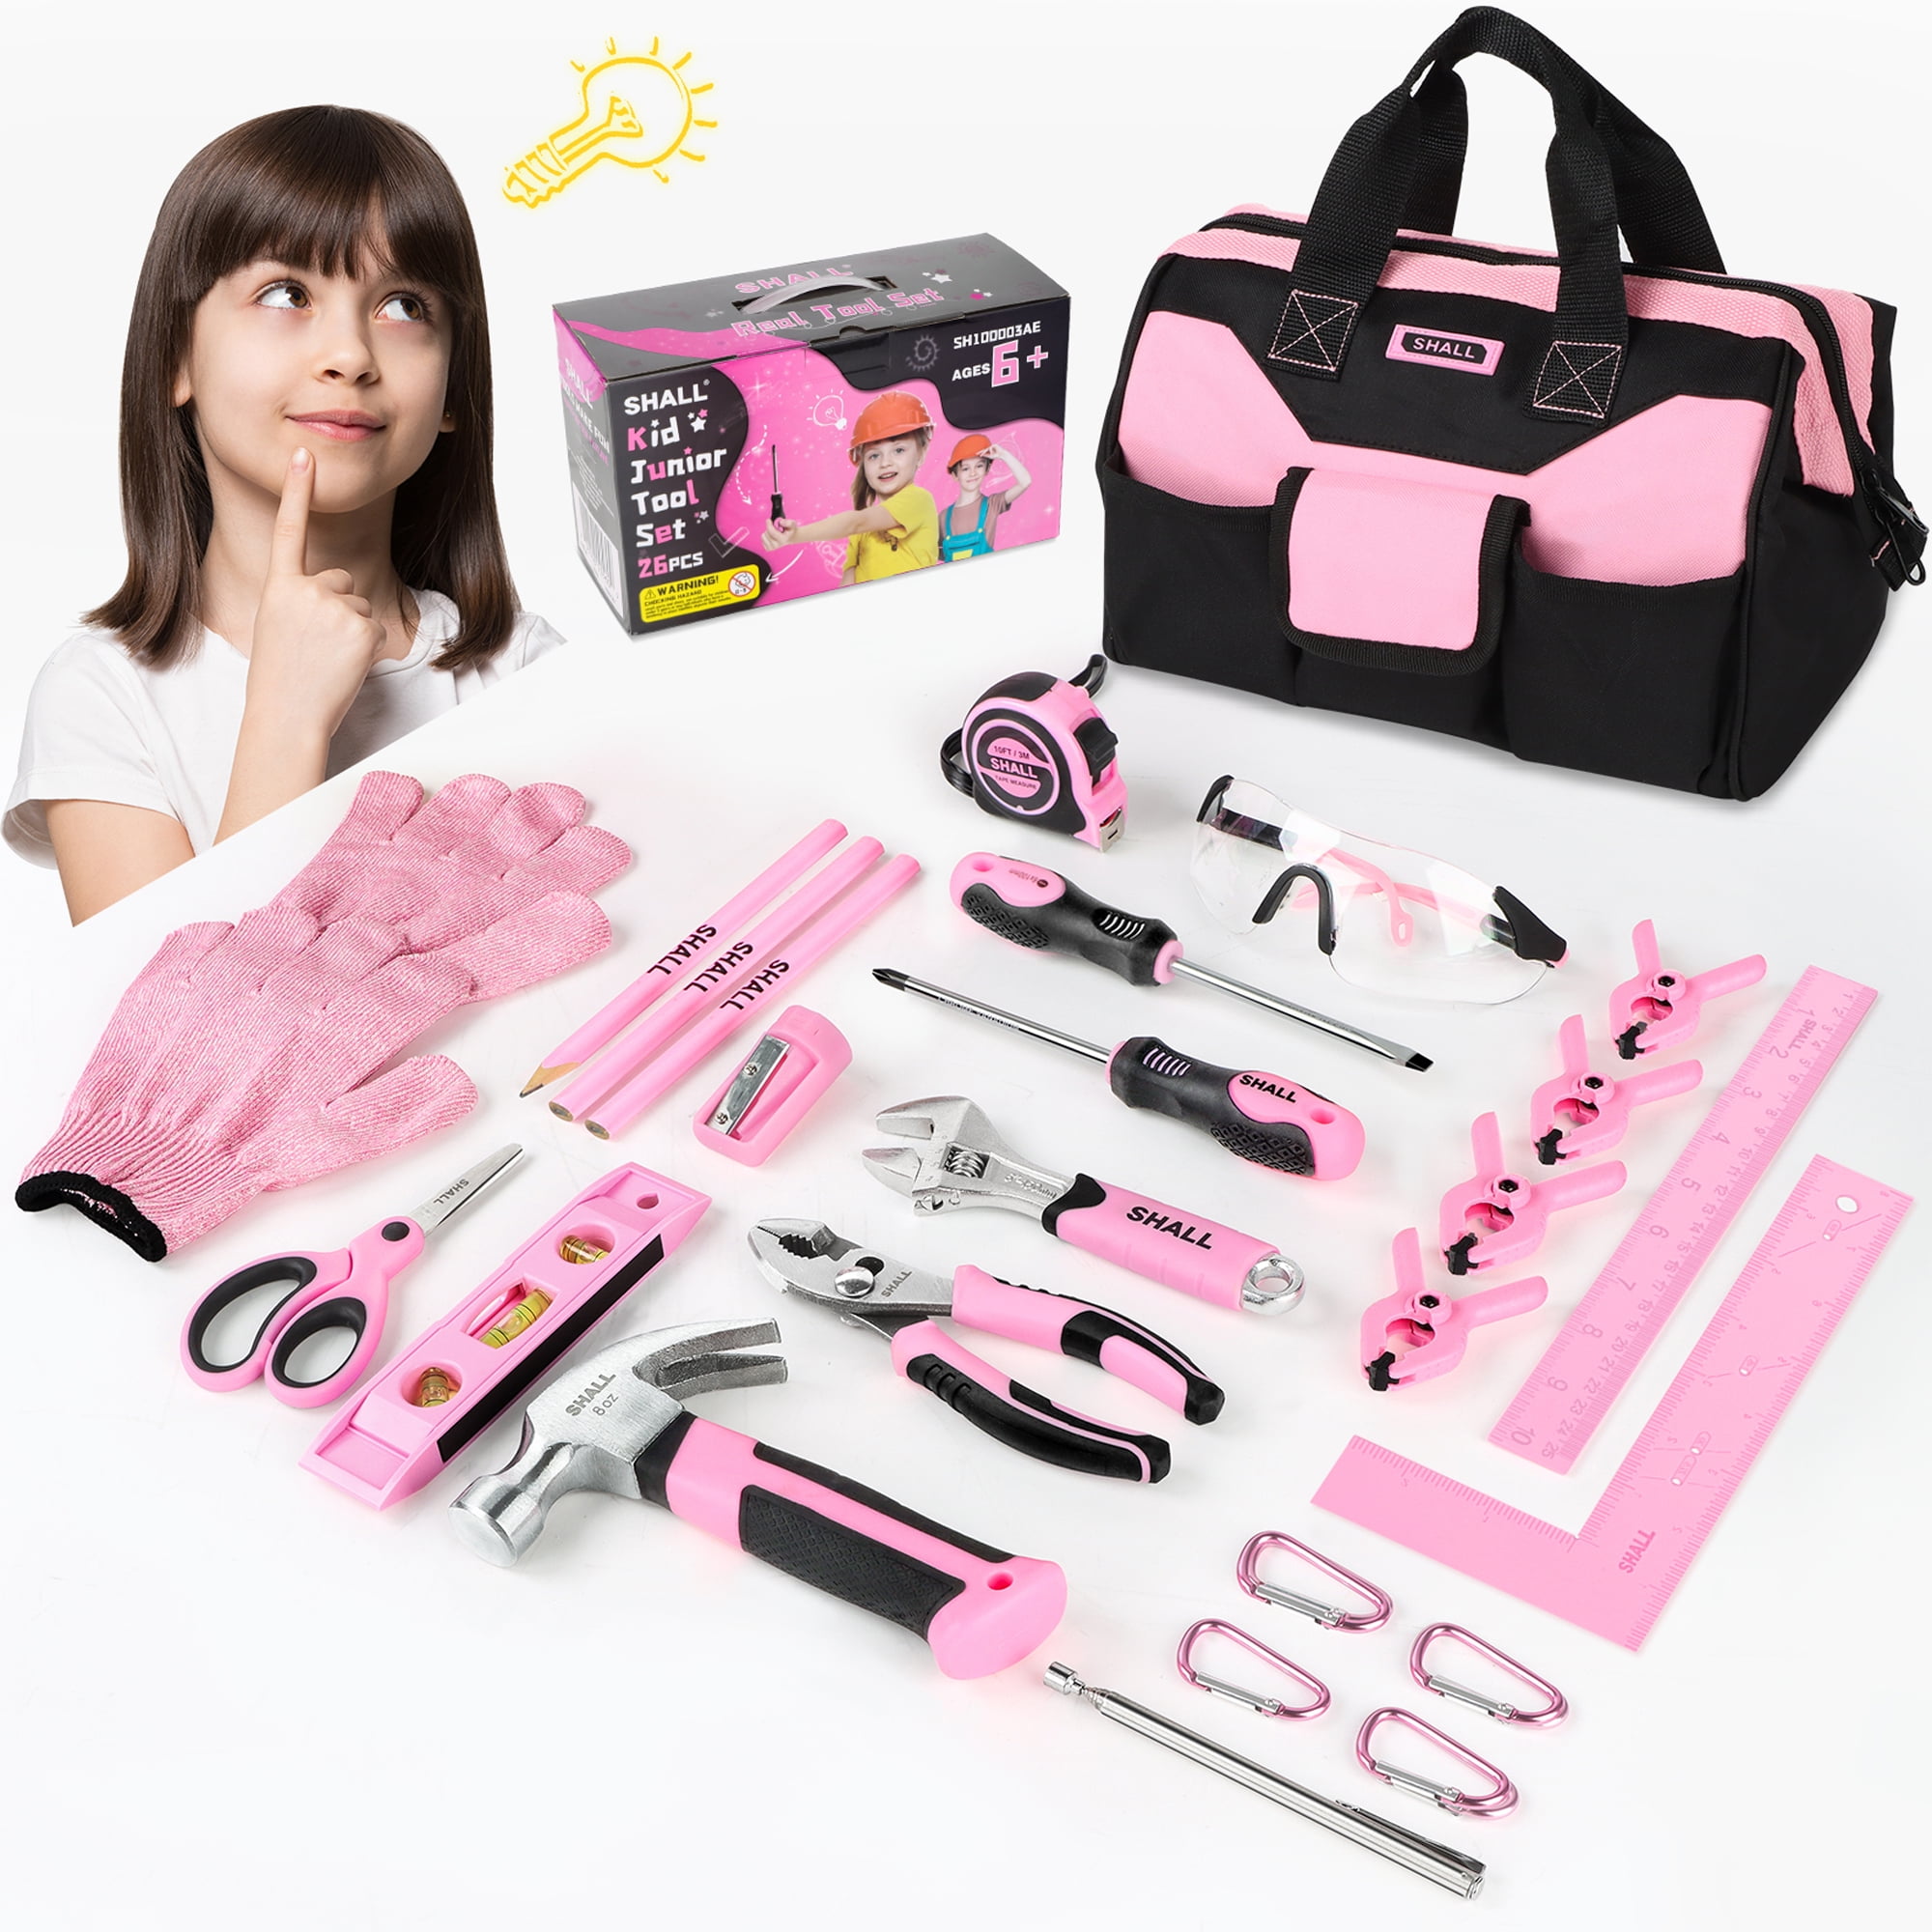 SHALL Kids Tool Set , 26-Piece Tool Kit with 12 Tool Bag, Real Tools for  kids Starter Set Boys & Girls Age 6+, DIY Building, Woodwork, Construction  Pink 